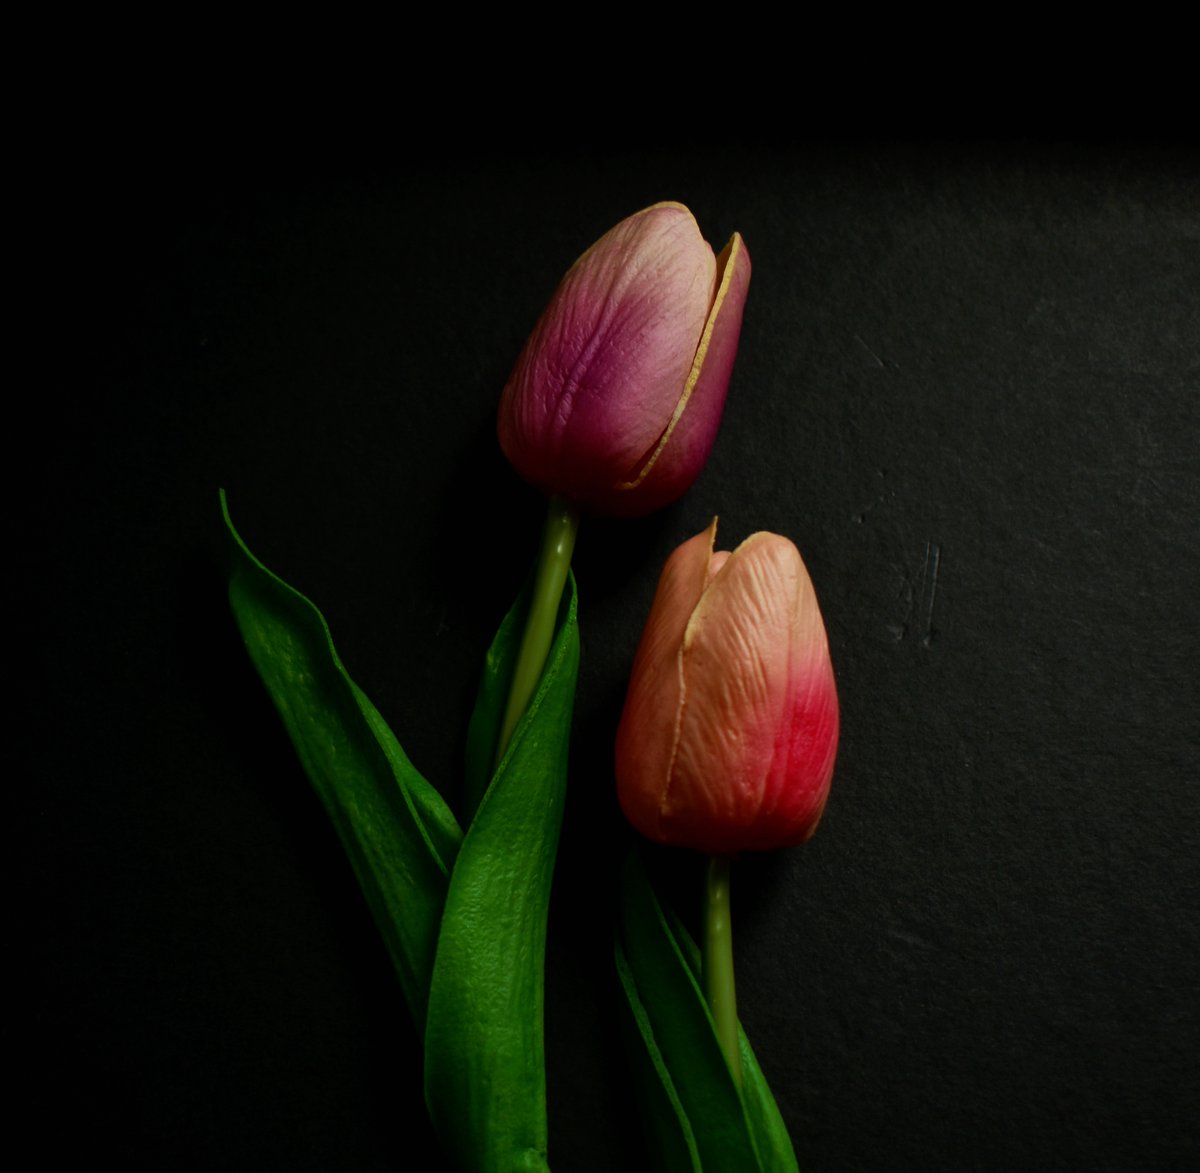 GM every one,
I would like show you some different photos from my 4 tulip collections
#opensea #nftphotography #nftprojects #nft #nftcollection  #nftflowers #nfttulips  #stilllifephotos #creativephotos